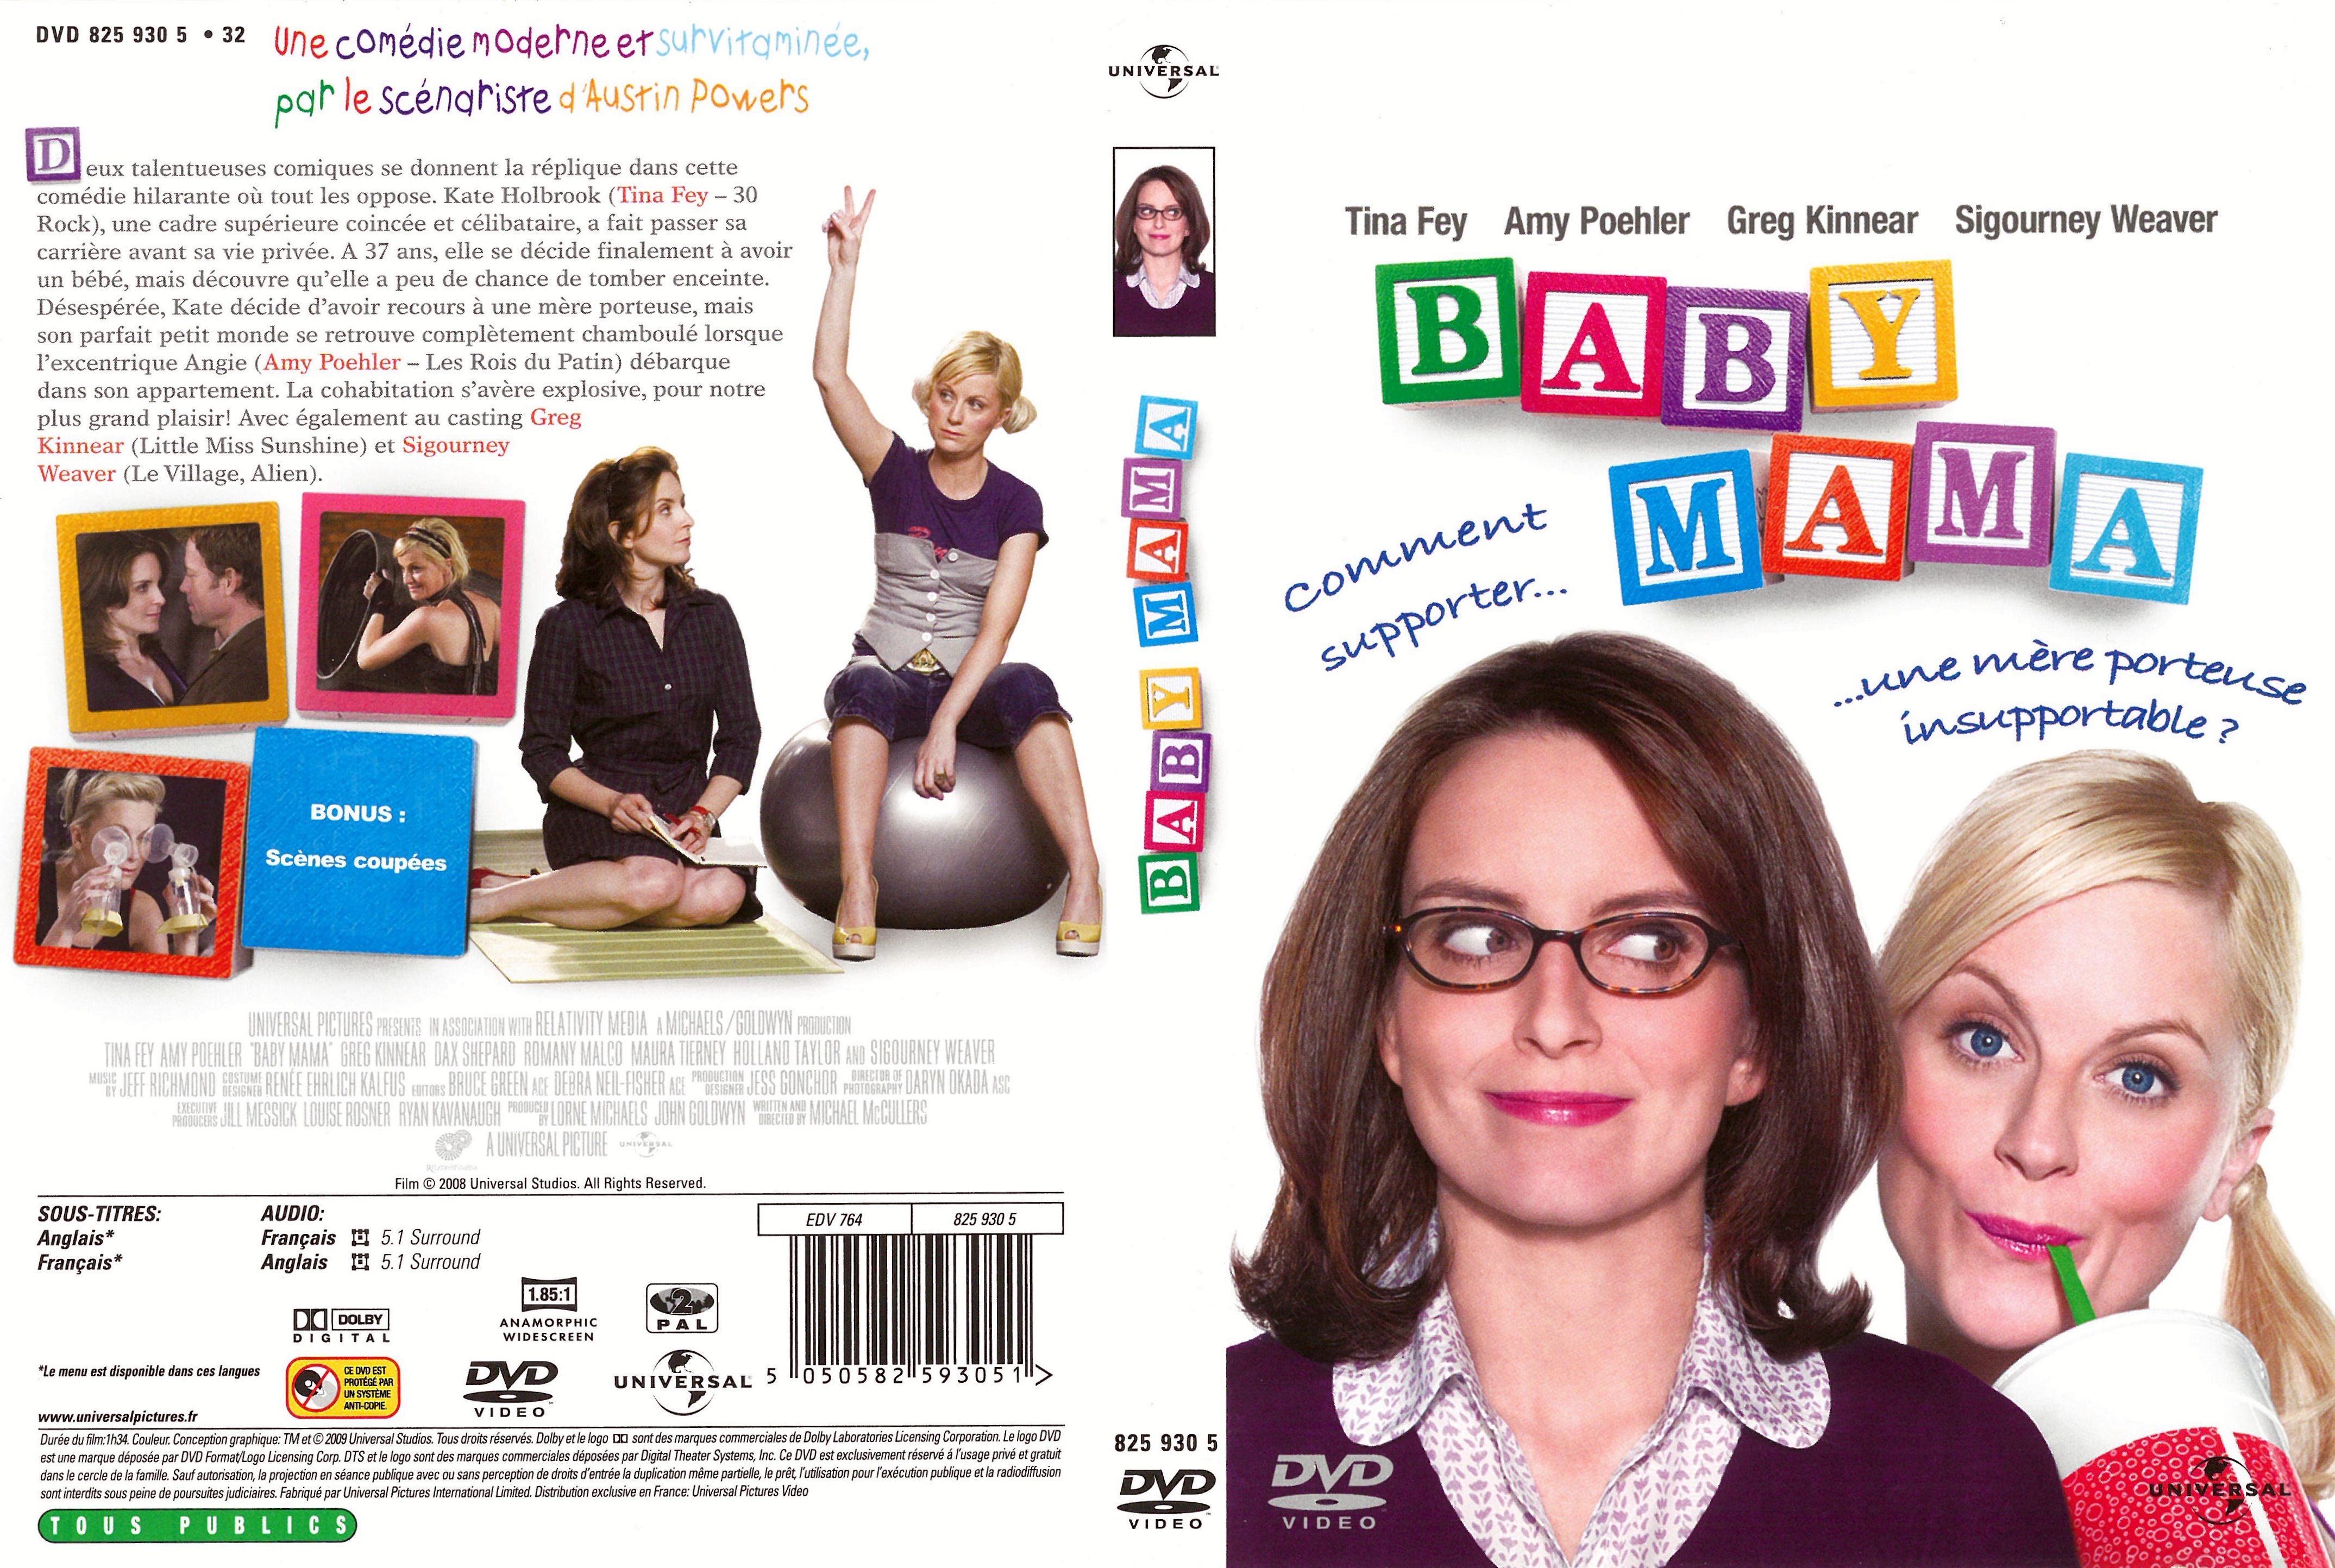 Jaquette DVD Baby mama